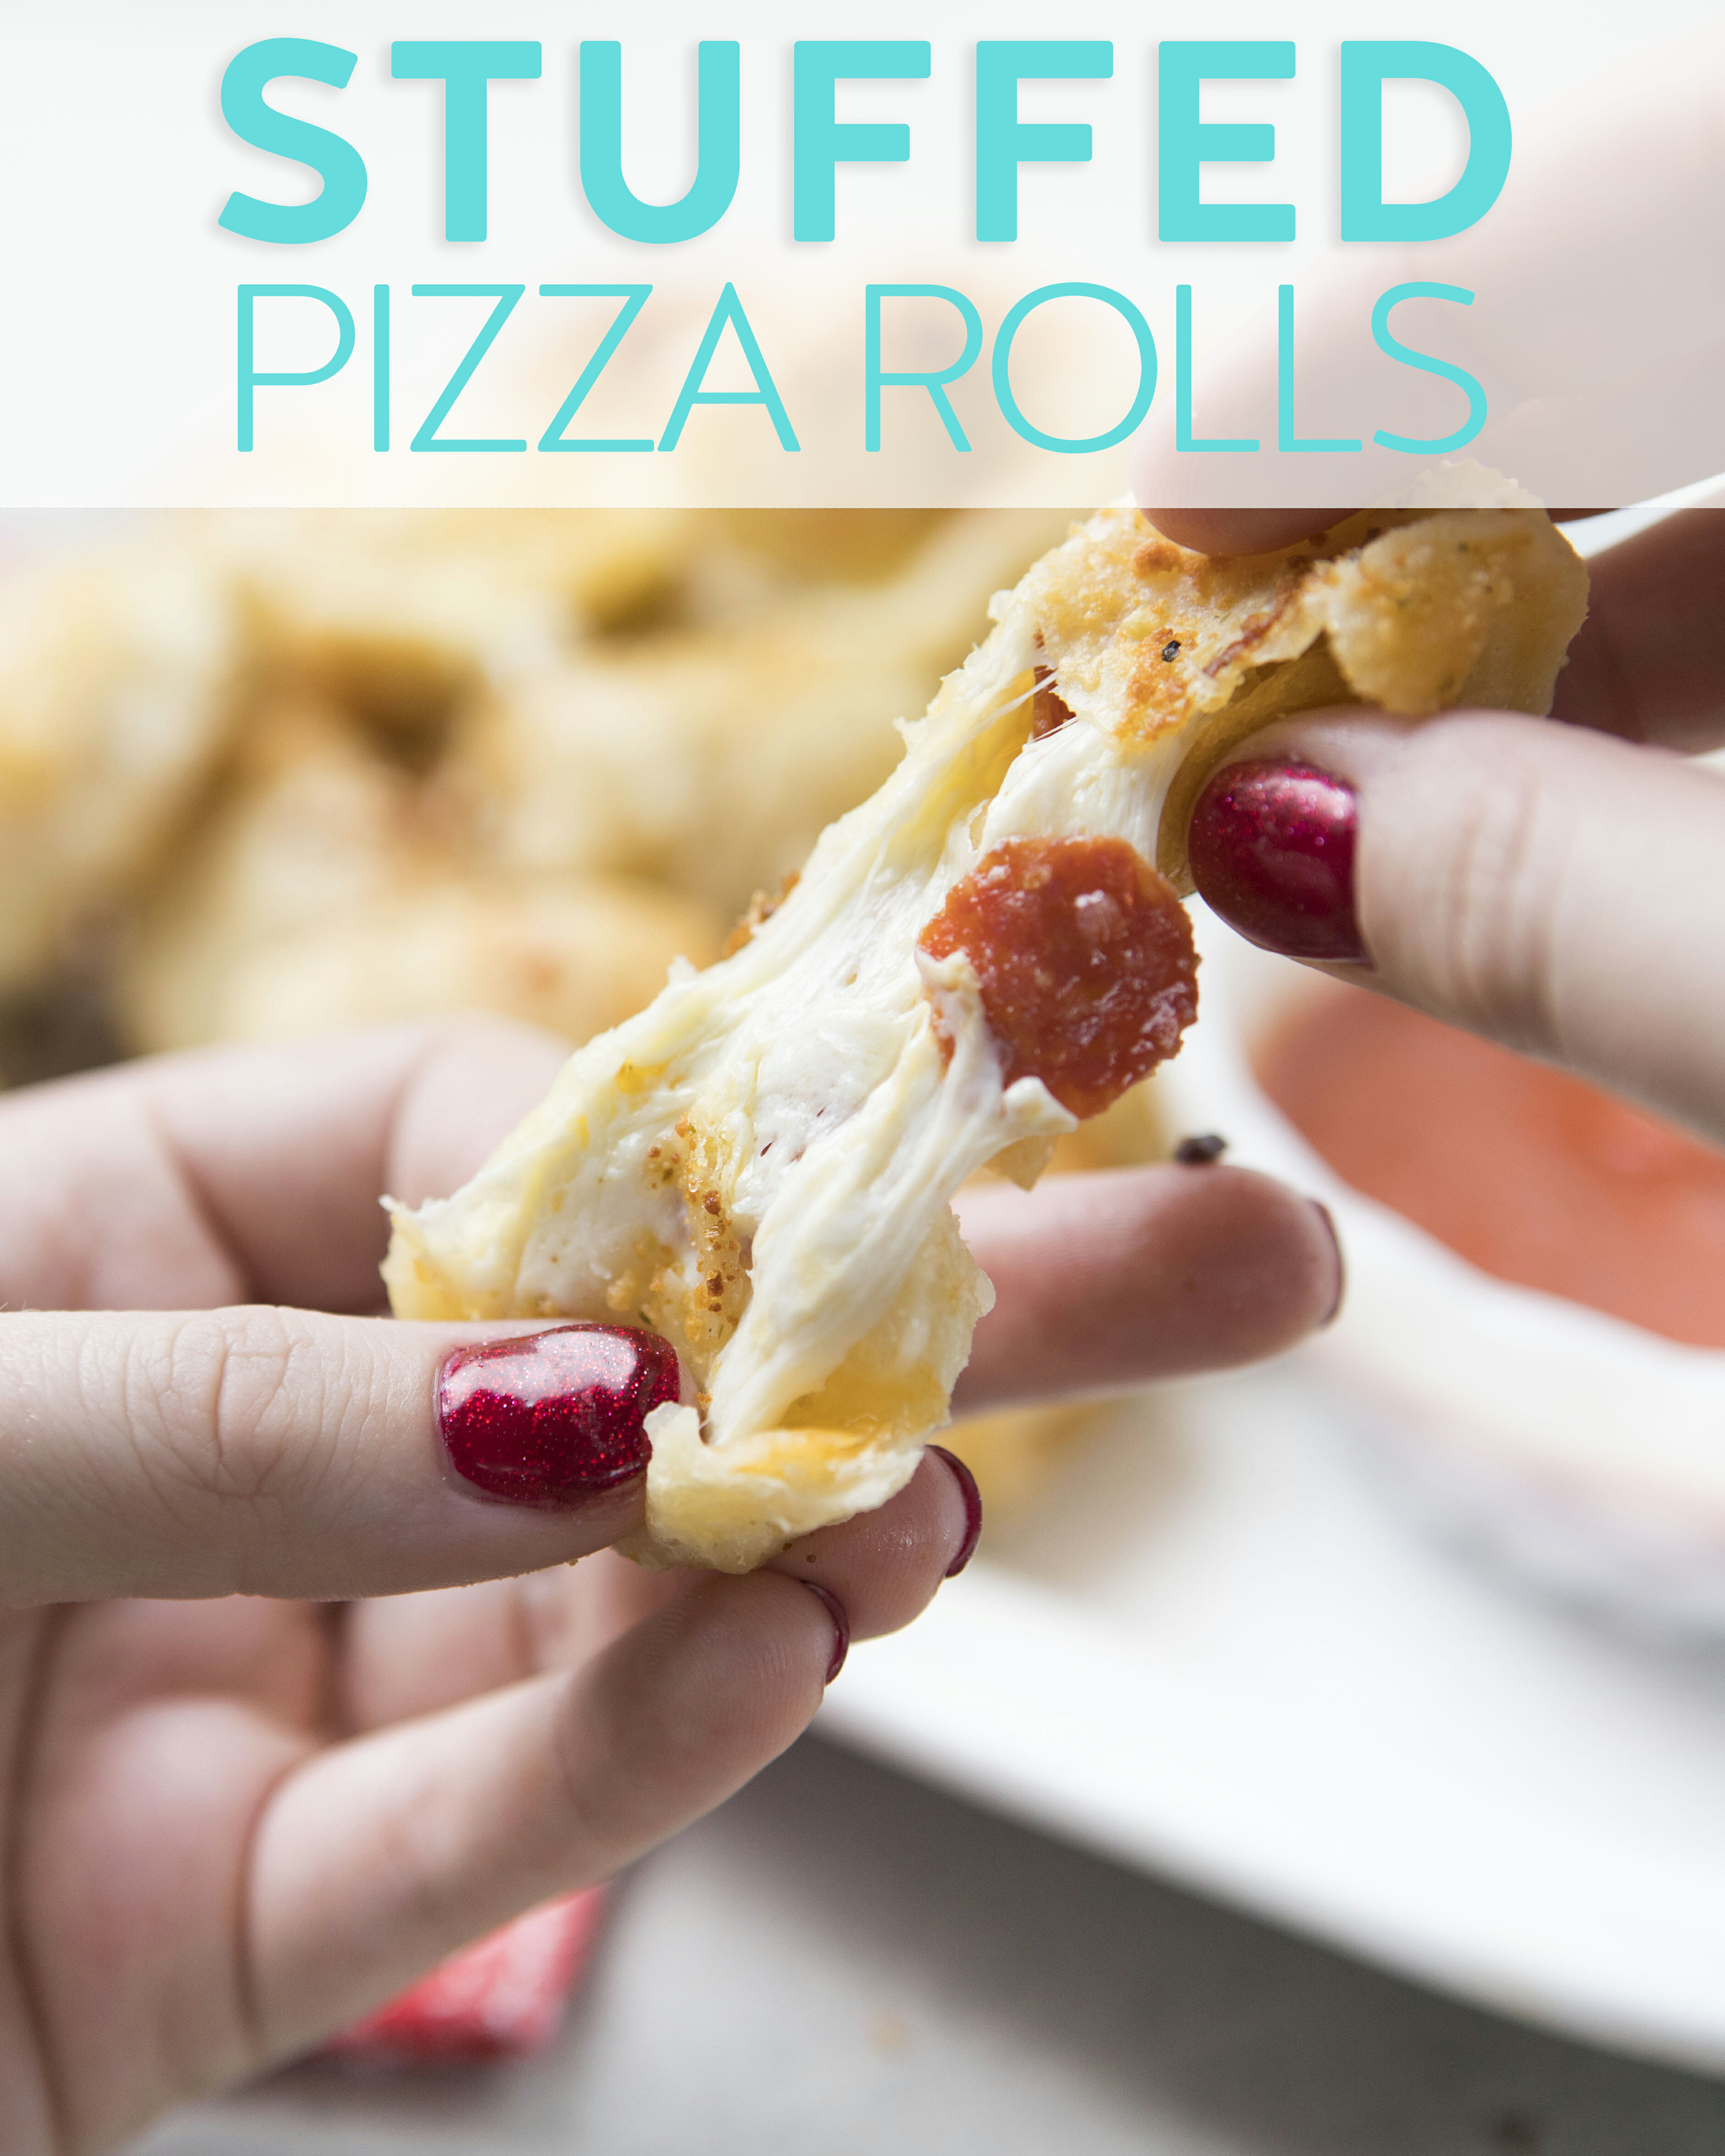 Stuffed pizza rolls from Our Best Bites